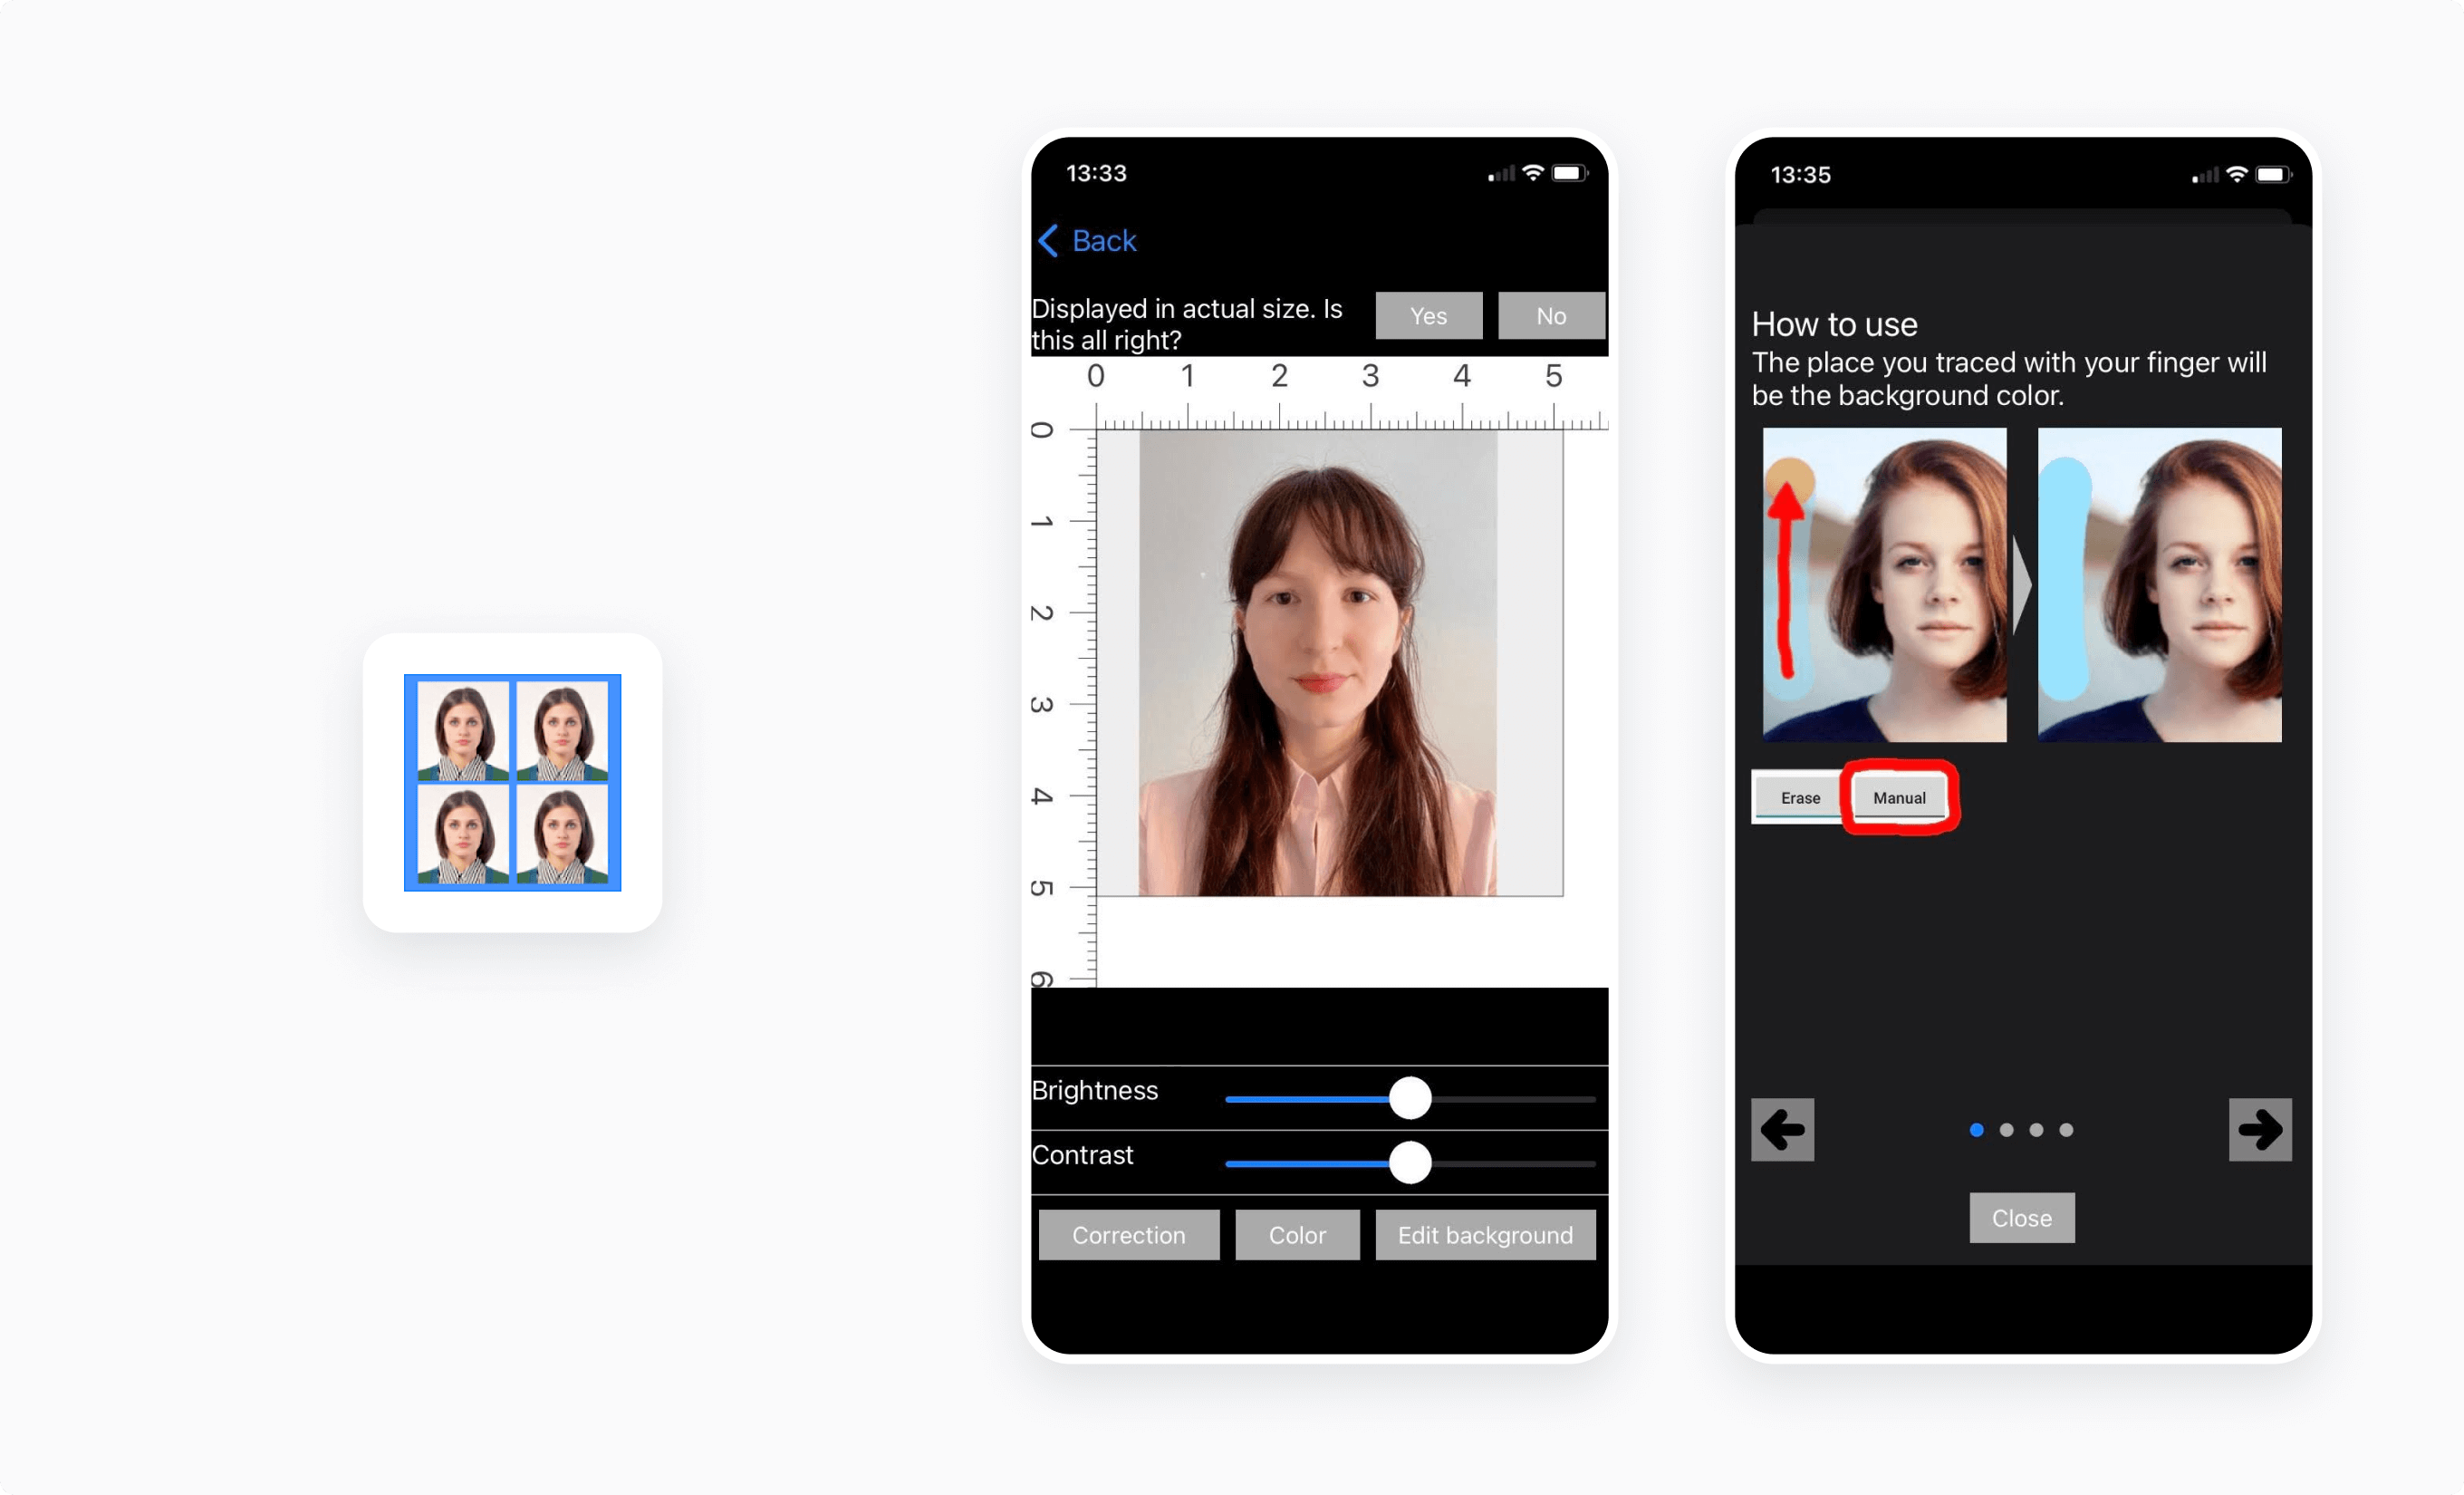 An automatic tool that resizes an uploaded photo to the US passport photo size